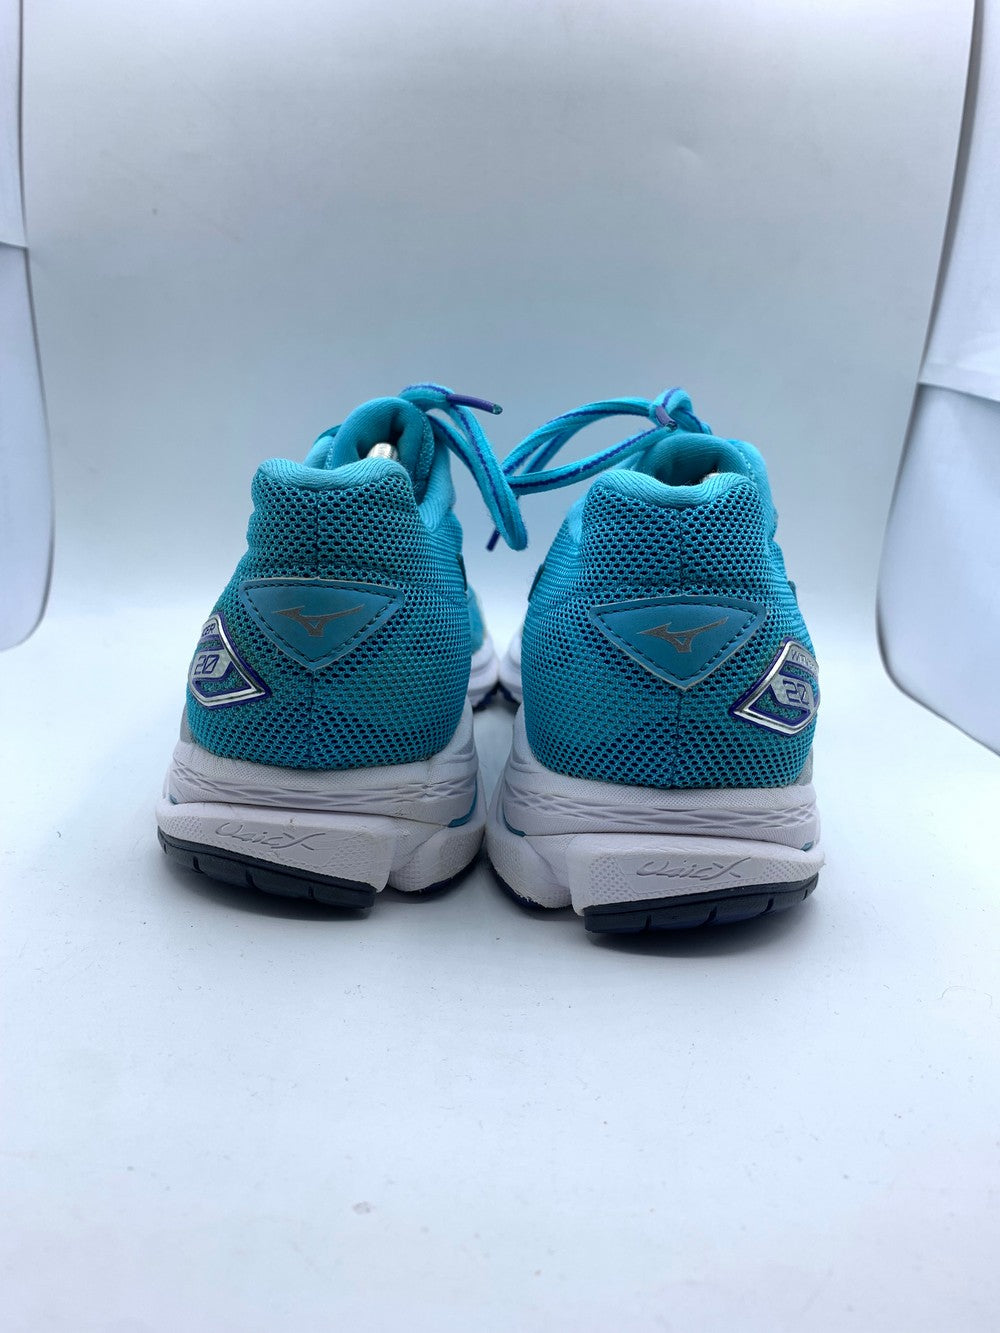 Mizuno Brand Sports Blue Running Shoes For Unisex